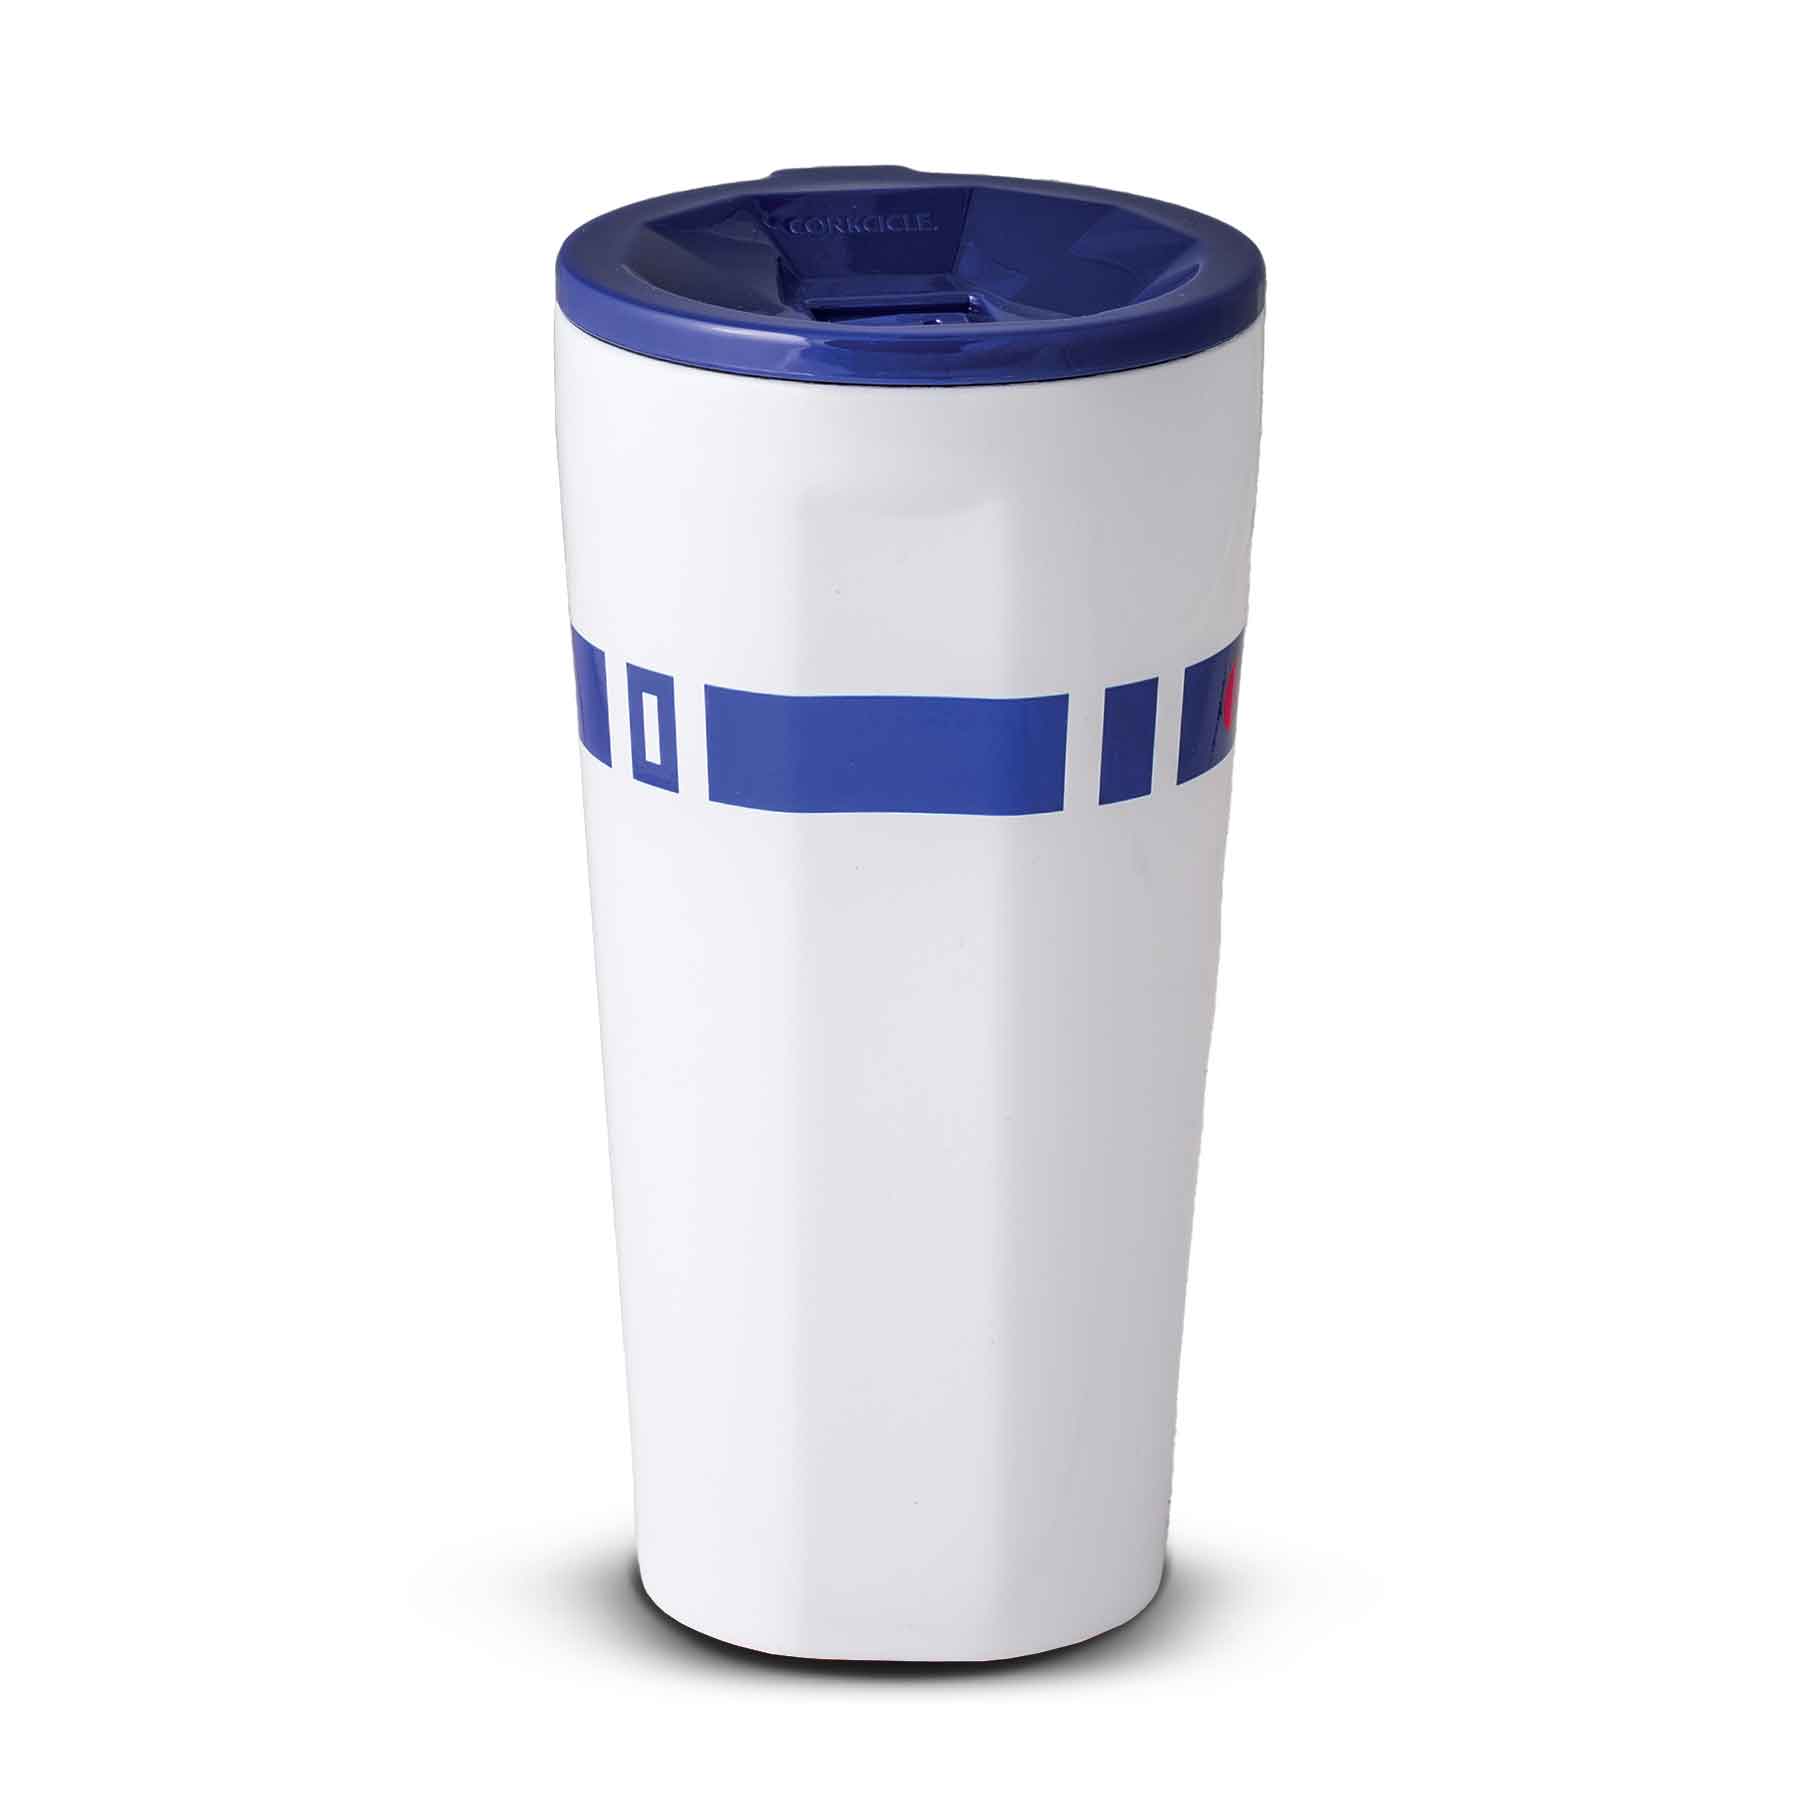 Corkcicle Star Wars R2-D2 Stainless Steel Tumbler, 16 oz